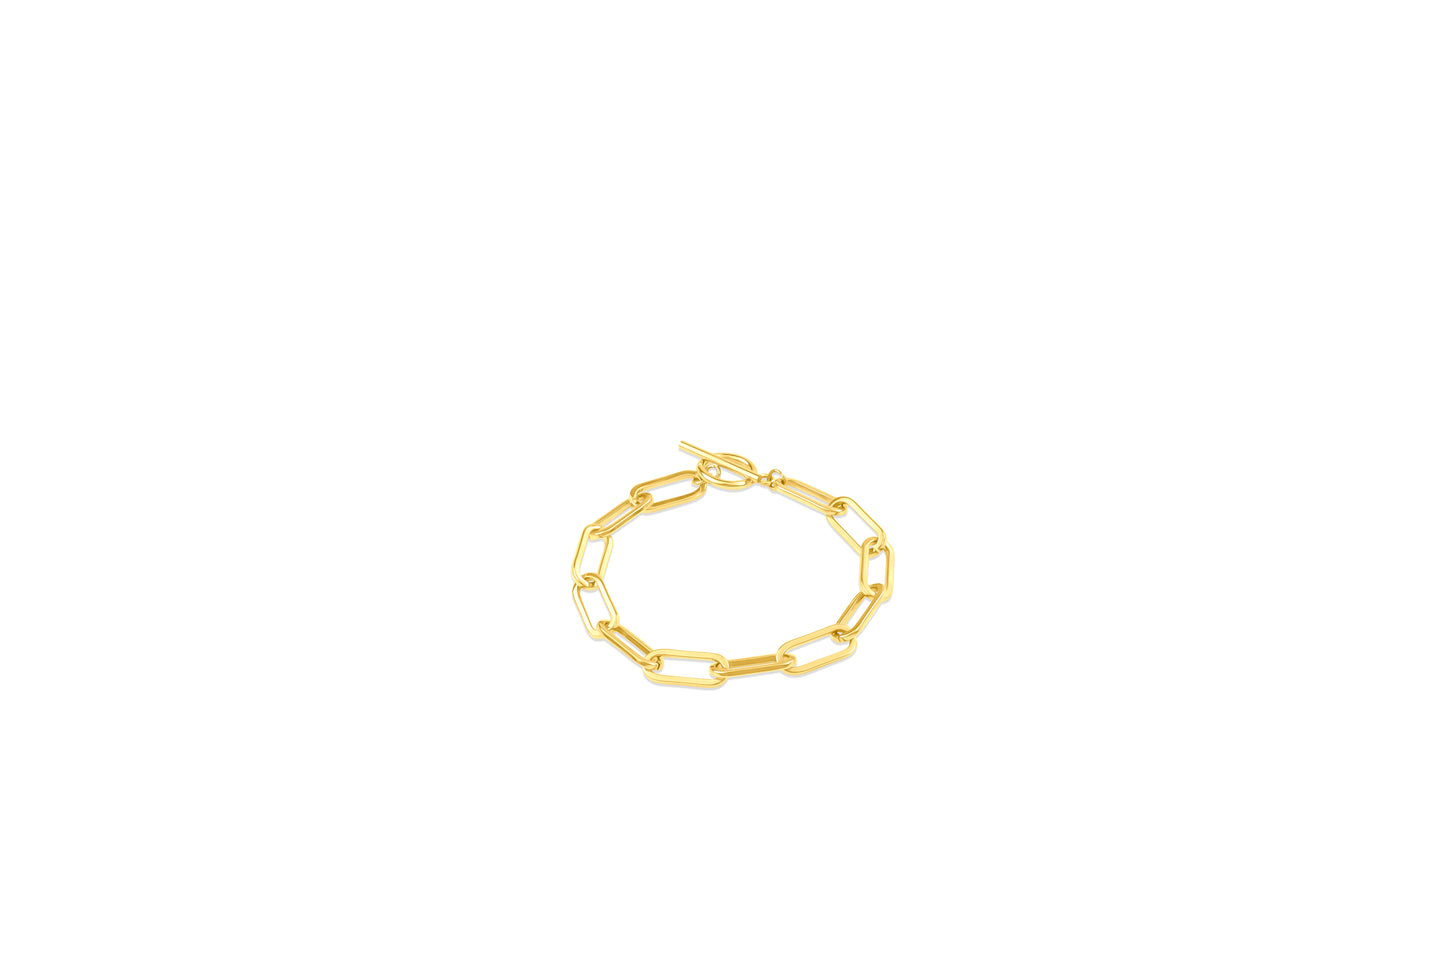 Gold Chunky Paperclip Chain bracelet with toggle closure.